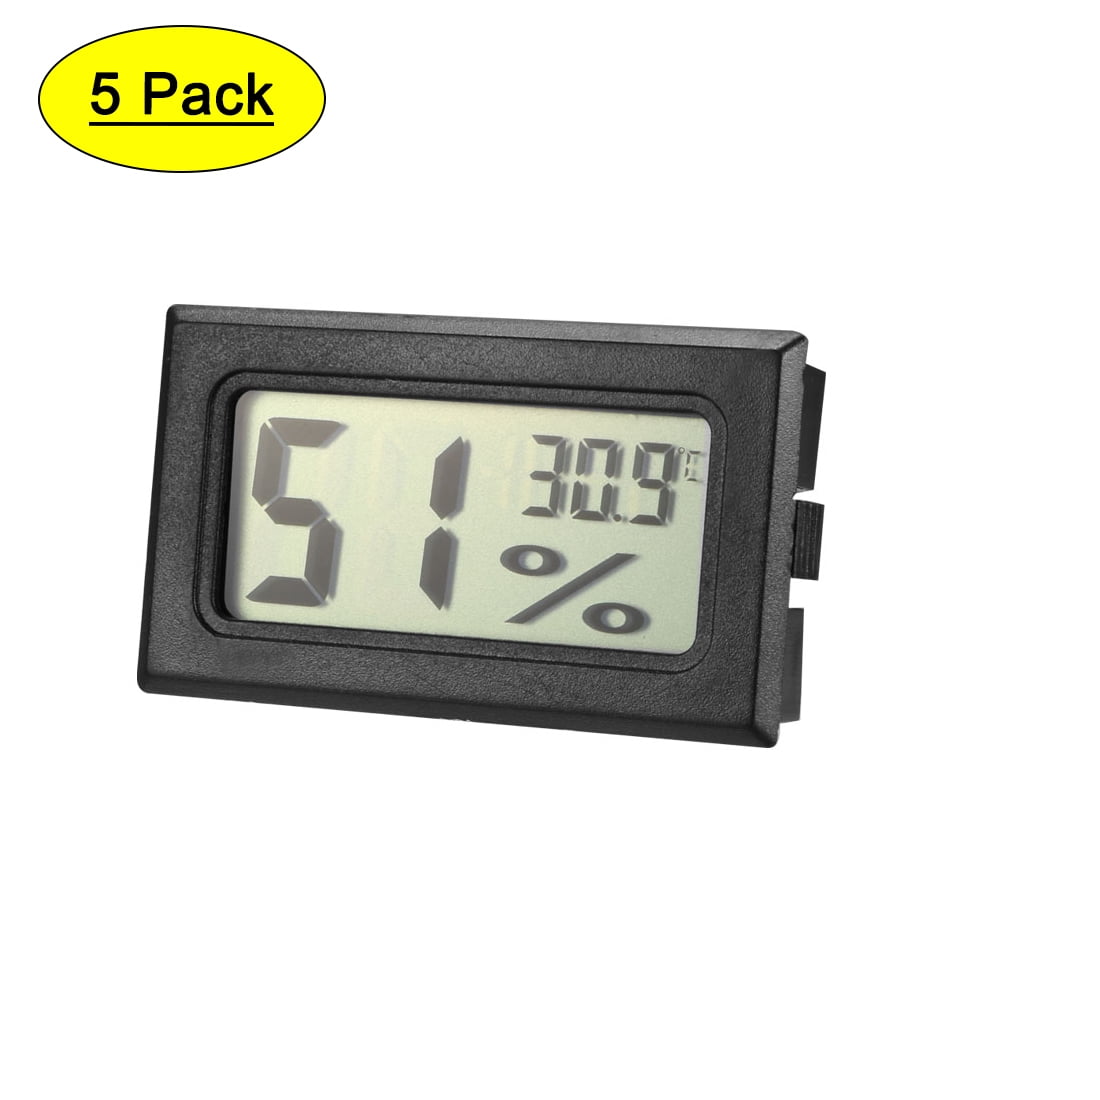 uxcell Black Digital Temperature Humidity Meters Gauge Indoor Thermometer Hygrometer LCD Display Celsius for Humidors °C Greenhouse 5pcs 